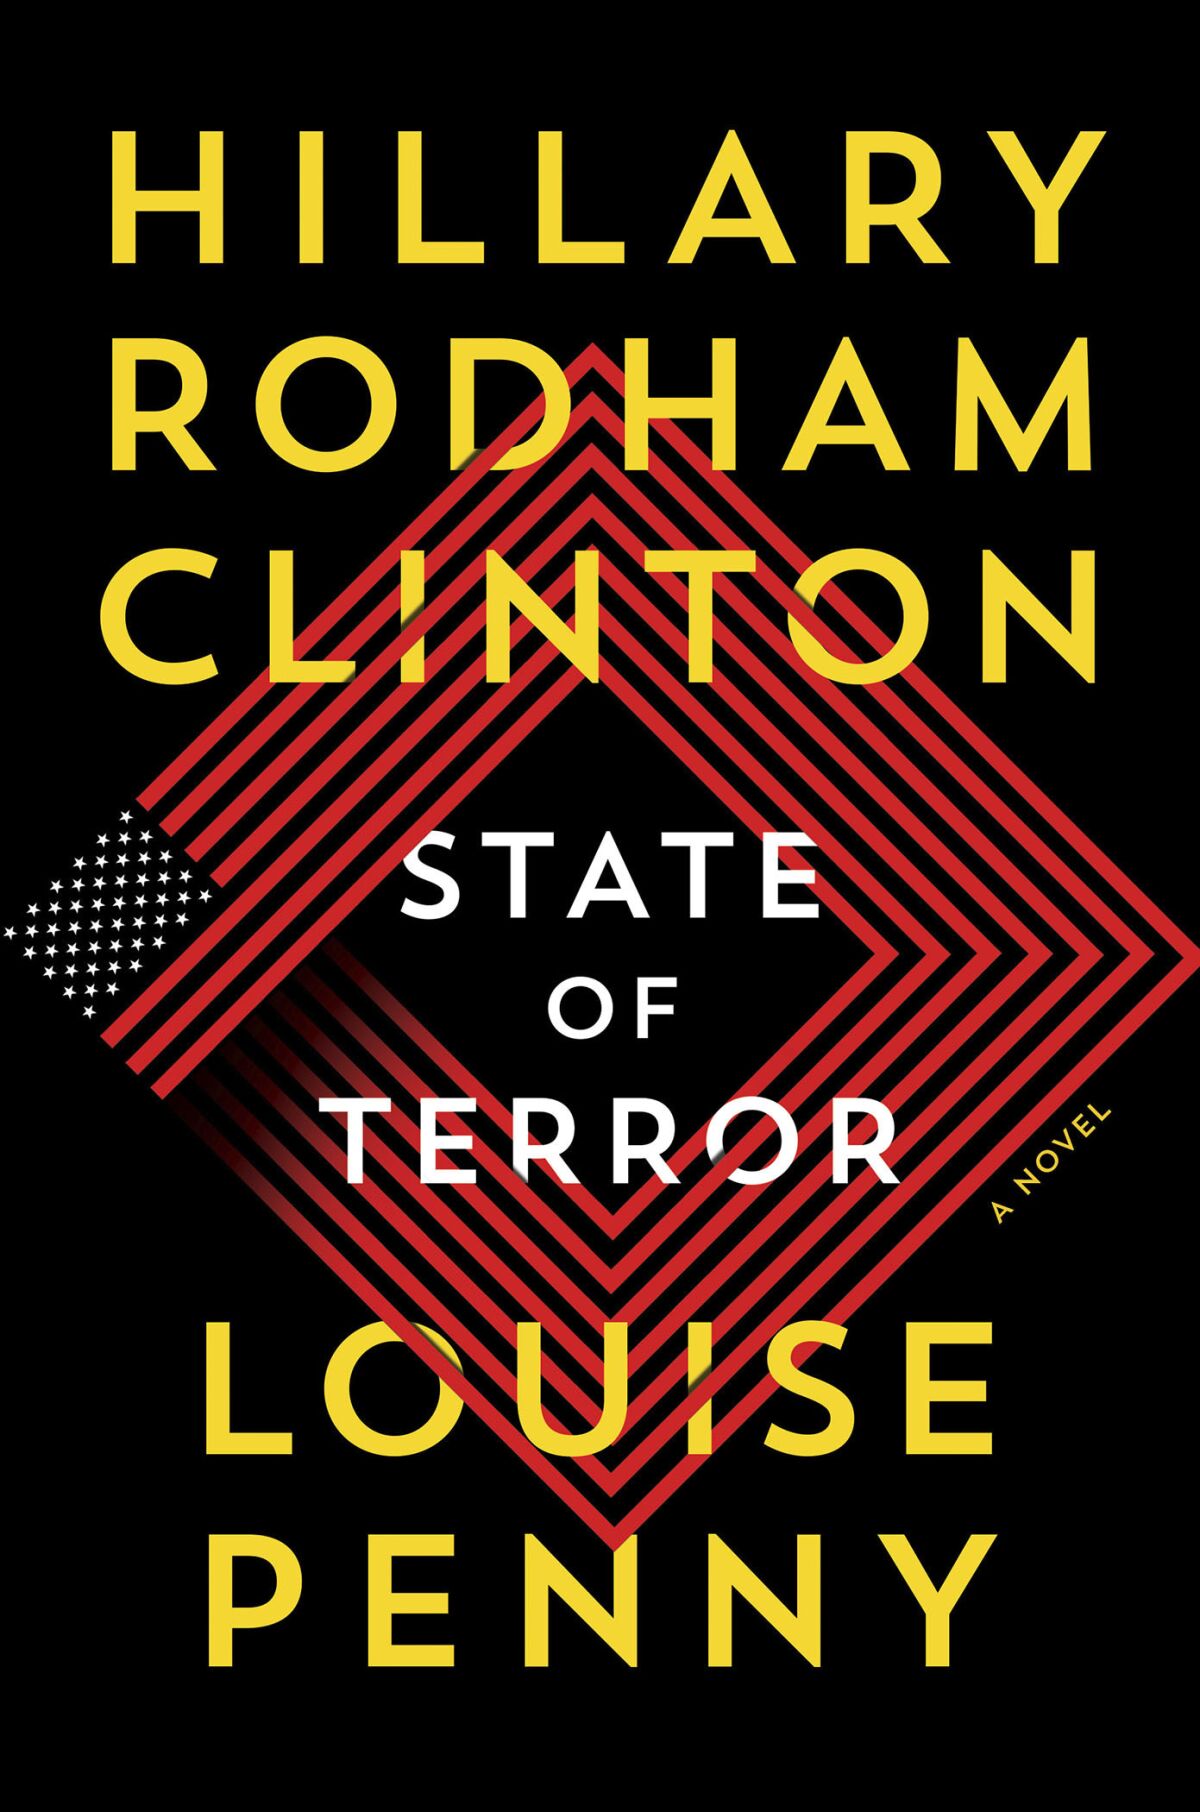 This cover image released by Simon & Schuster shows "State of Terror," a novel by Hillary Rodham Clinton and Louise Penny. (Simon & Schuster via AP)